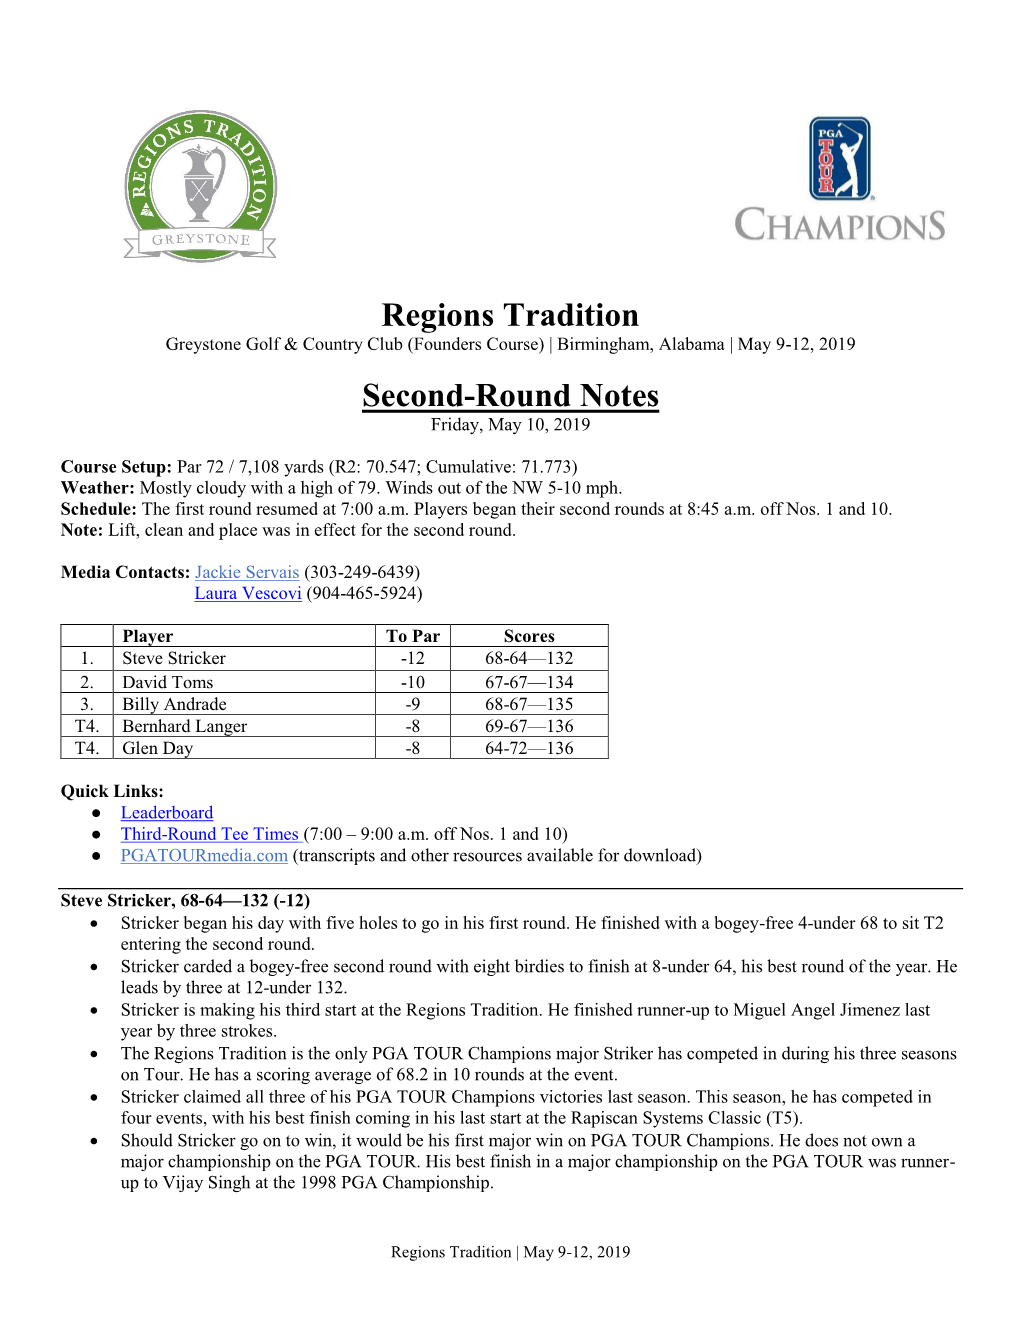 Regions Tradition Second-Round Notes